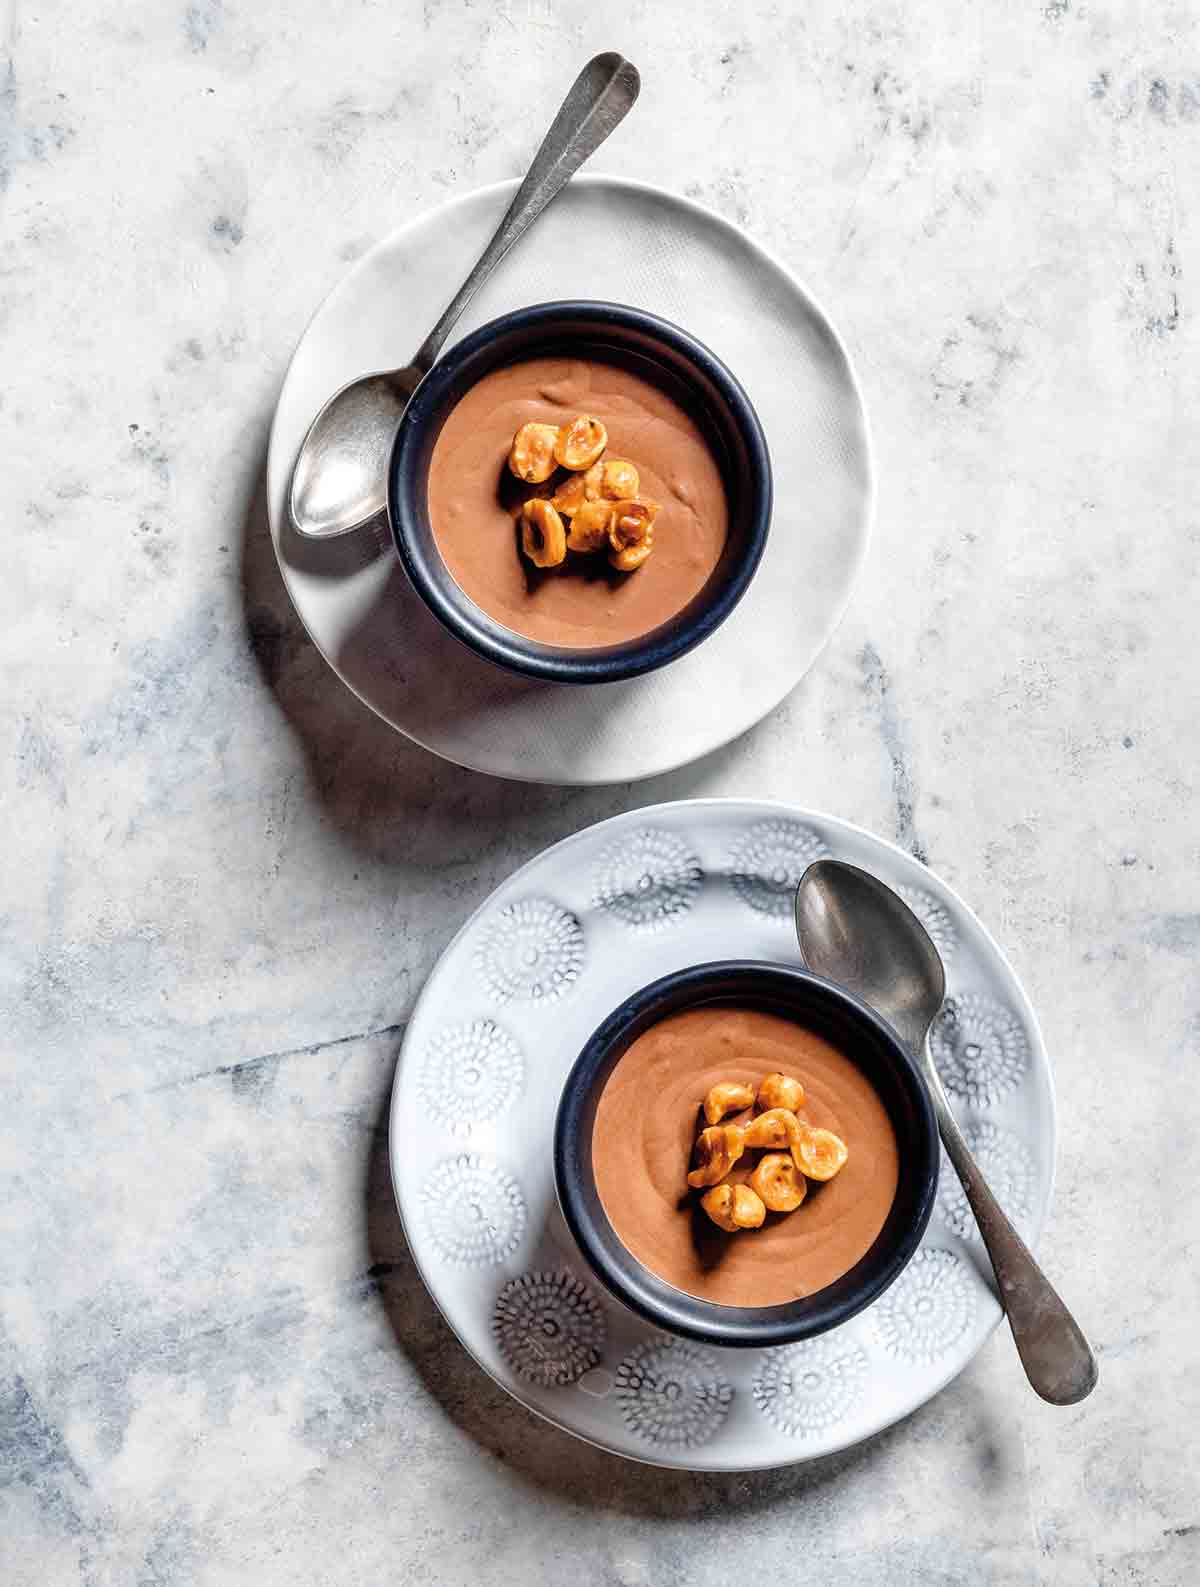 Two bowls filled with chocolate mousse and candied hazelnuts on top, sitting on plates with a silver spoon on the side of each bowl.